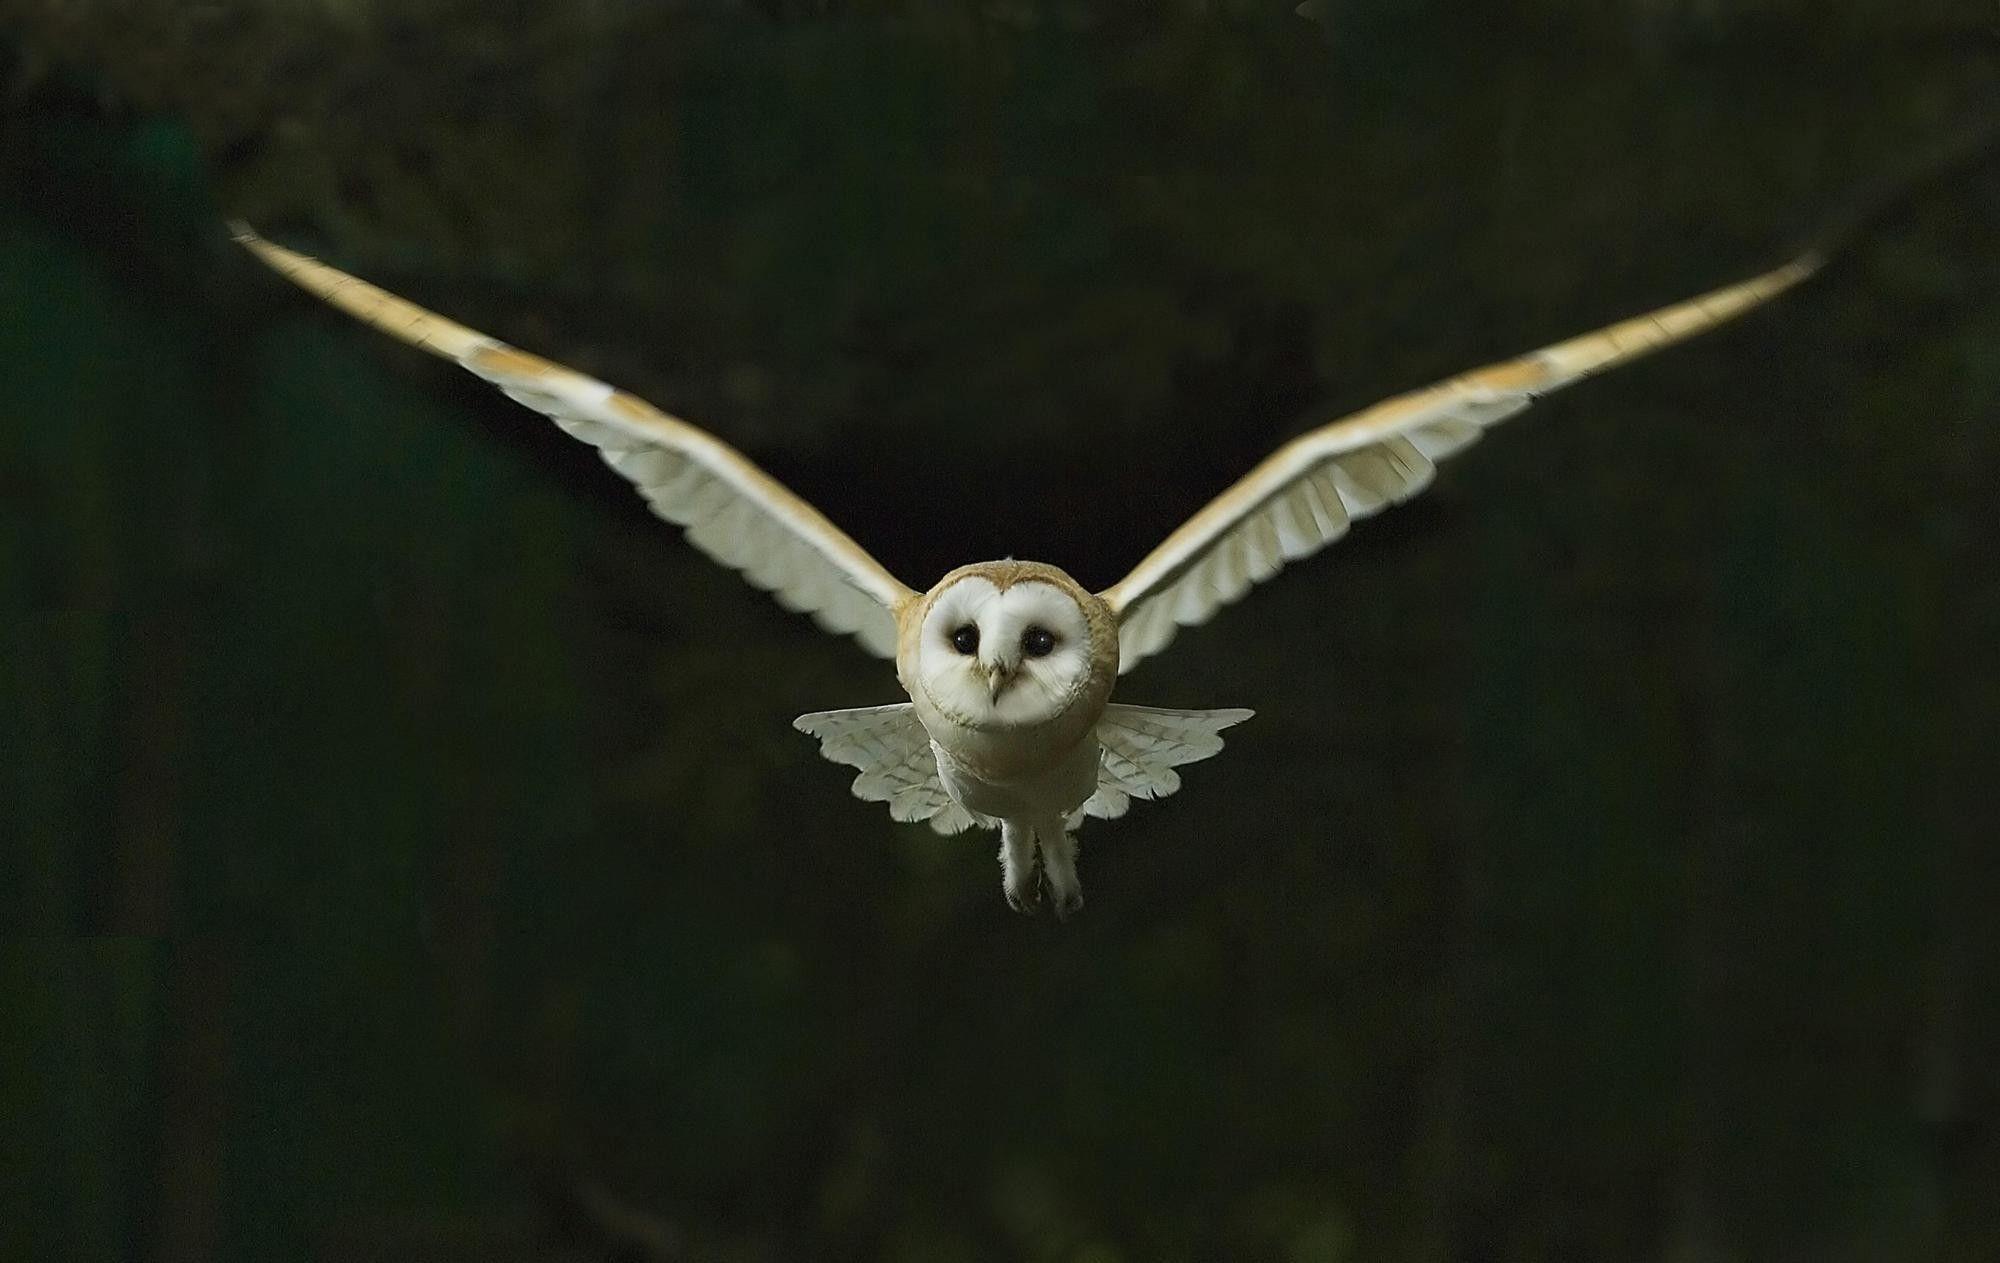 Barn Owl Wallpapers HD Barn Owl Backgrounds Free Images Download